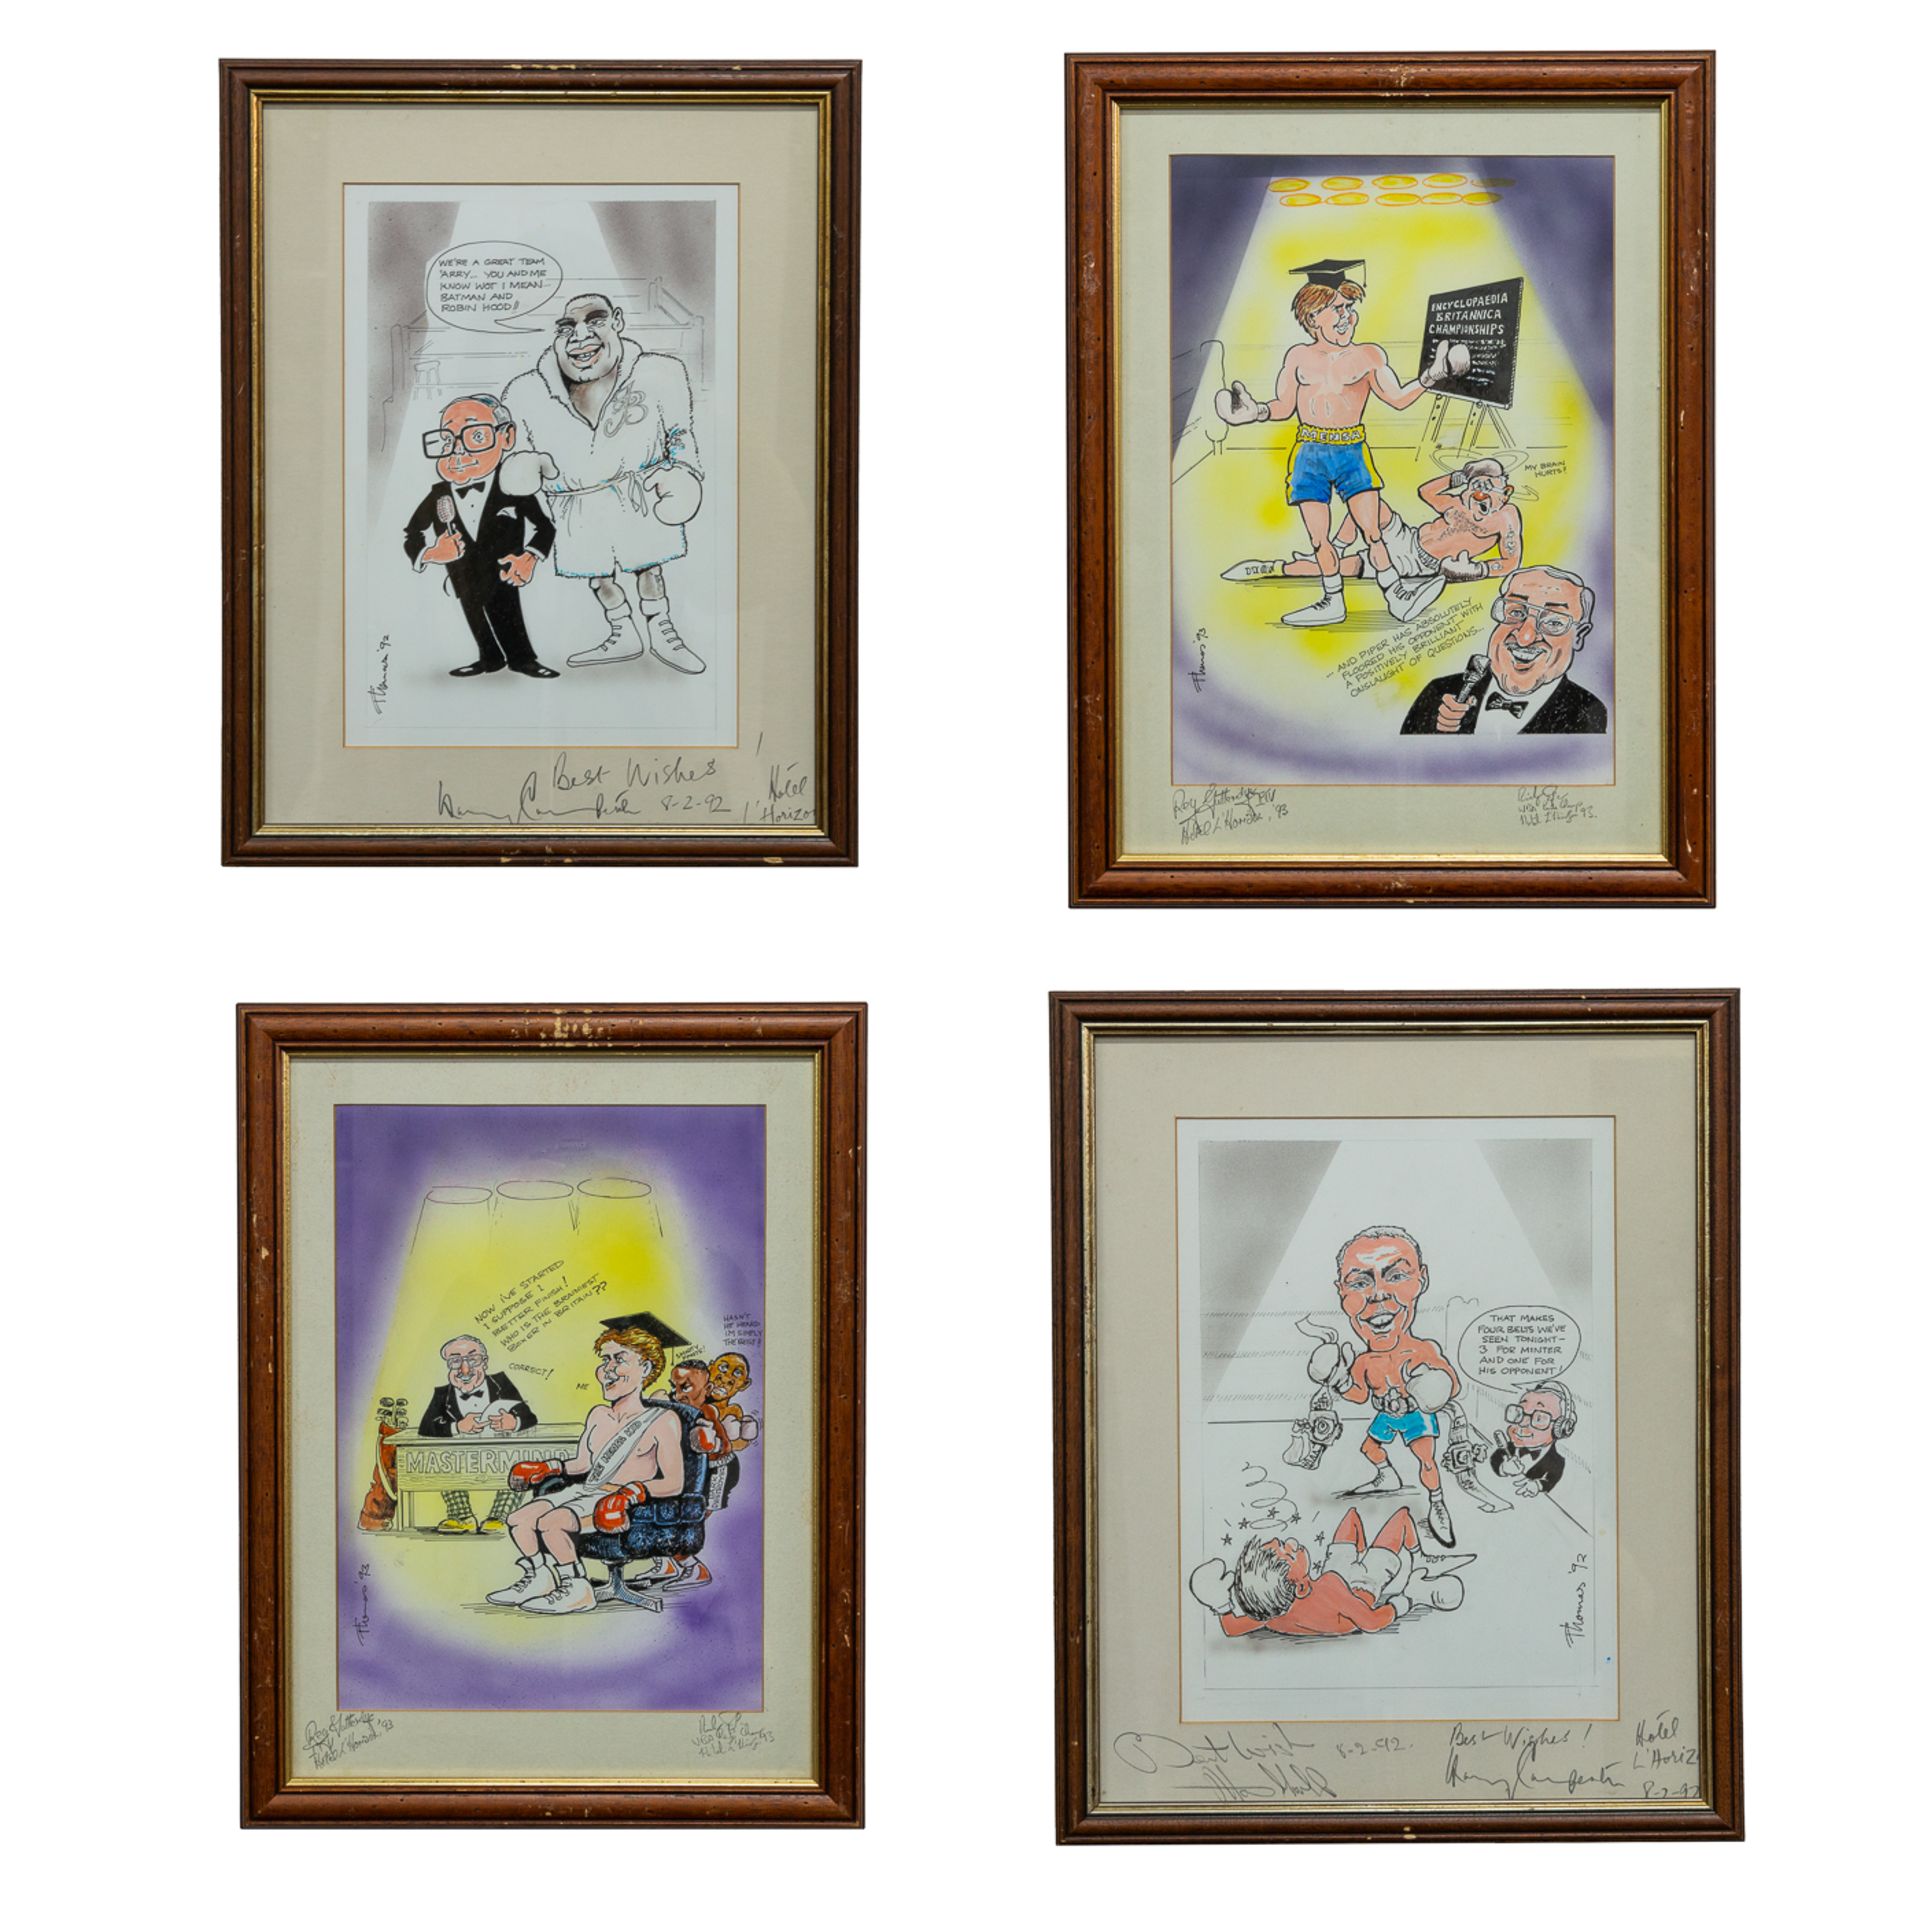 A collection of 4 boxing caricatures